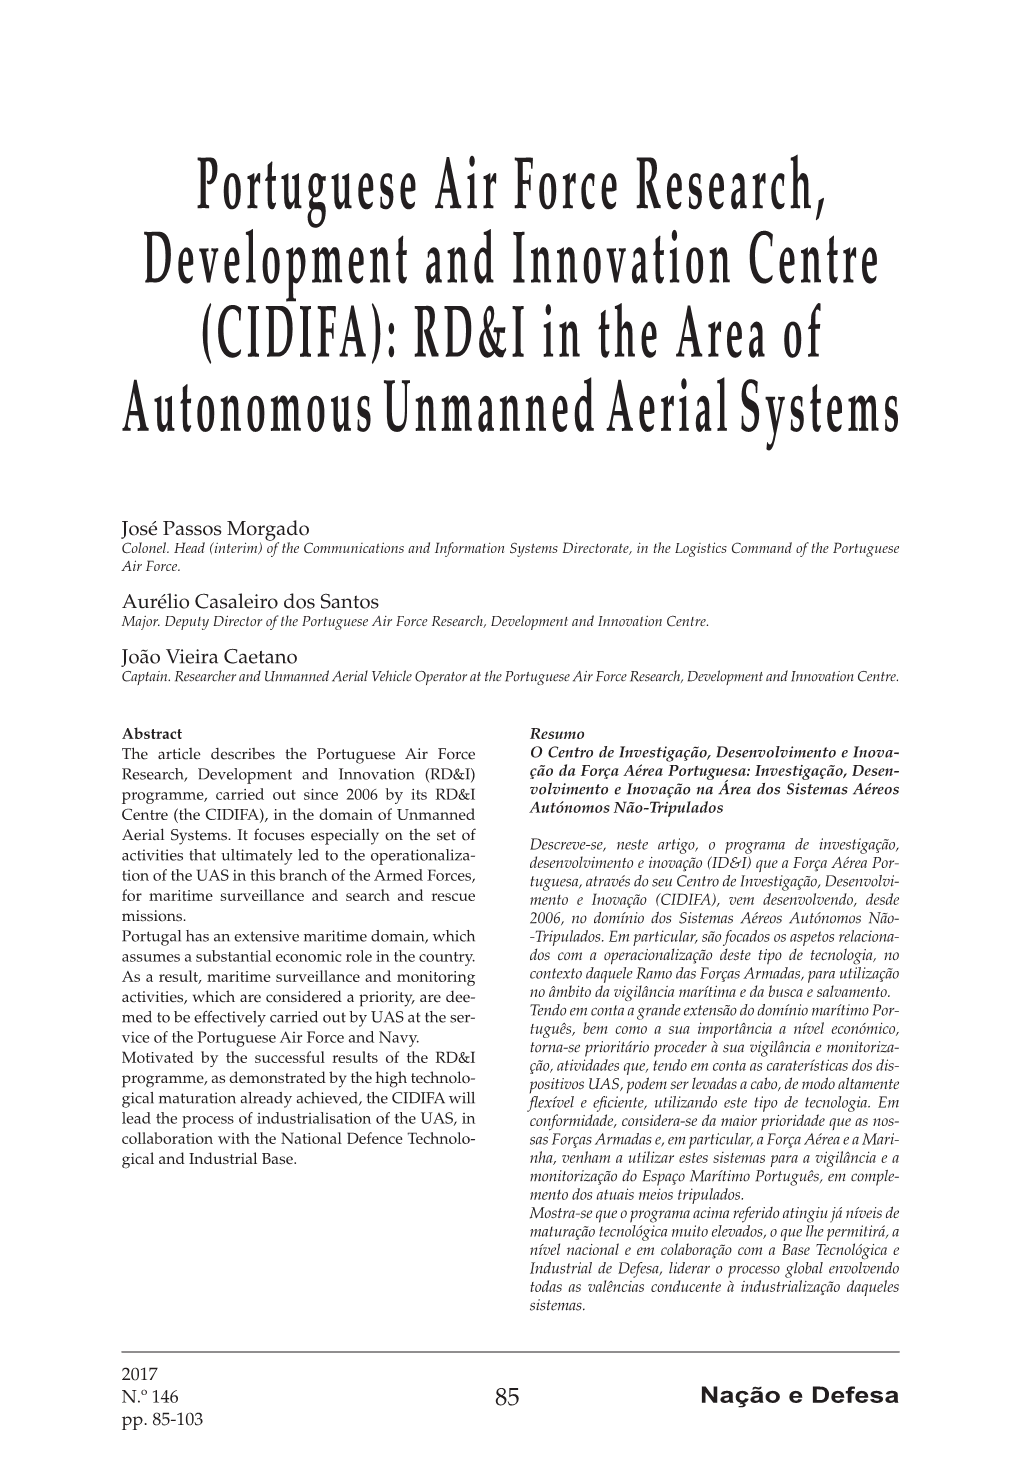 Portuguese Air Force Research, Development and Innovation Centre (CIDIFA): RD&I in the Area of Autonomous Unmanned Aerial Systems